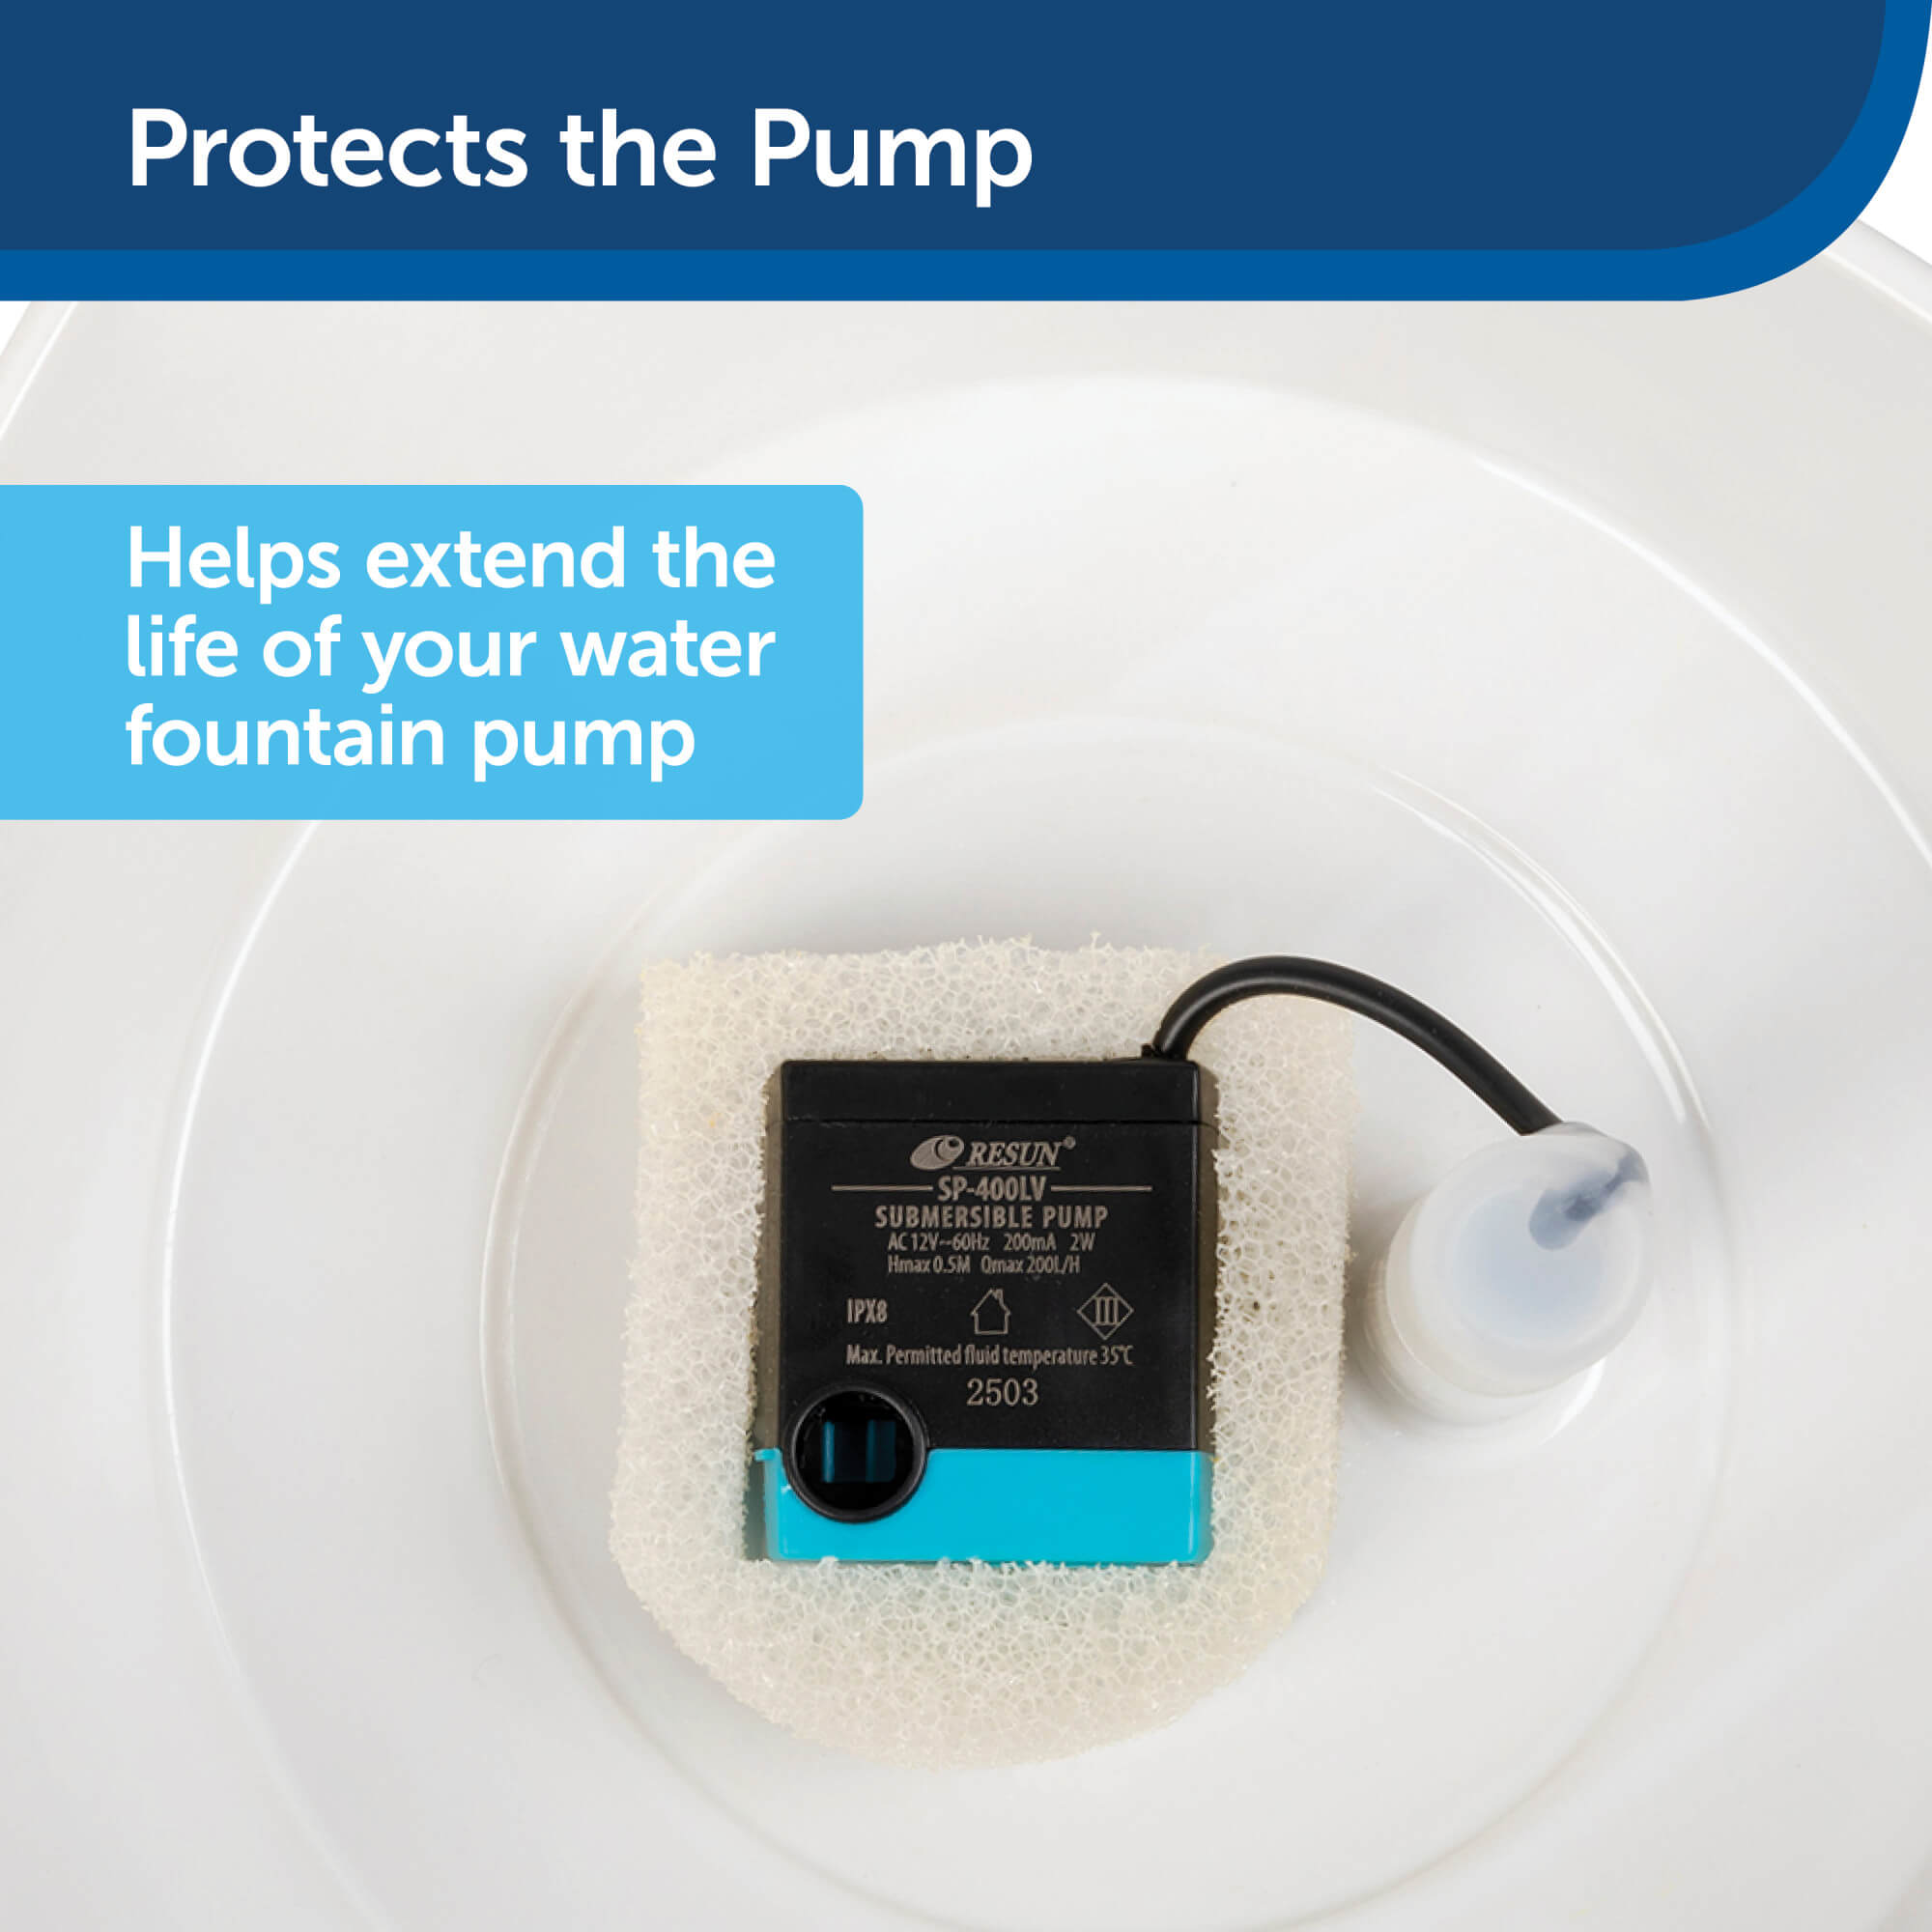 Protects the Drinkwell pump